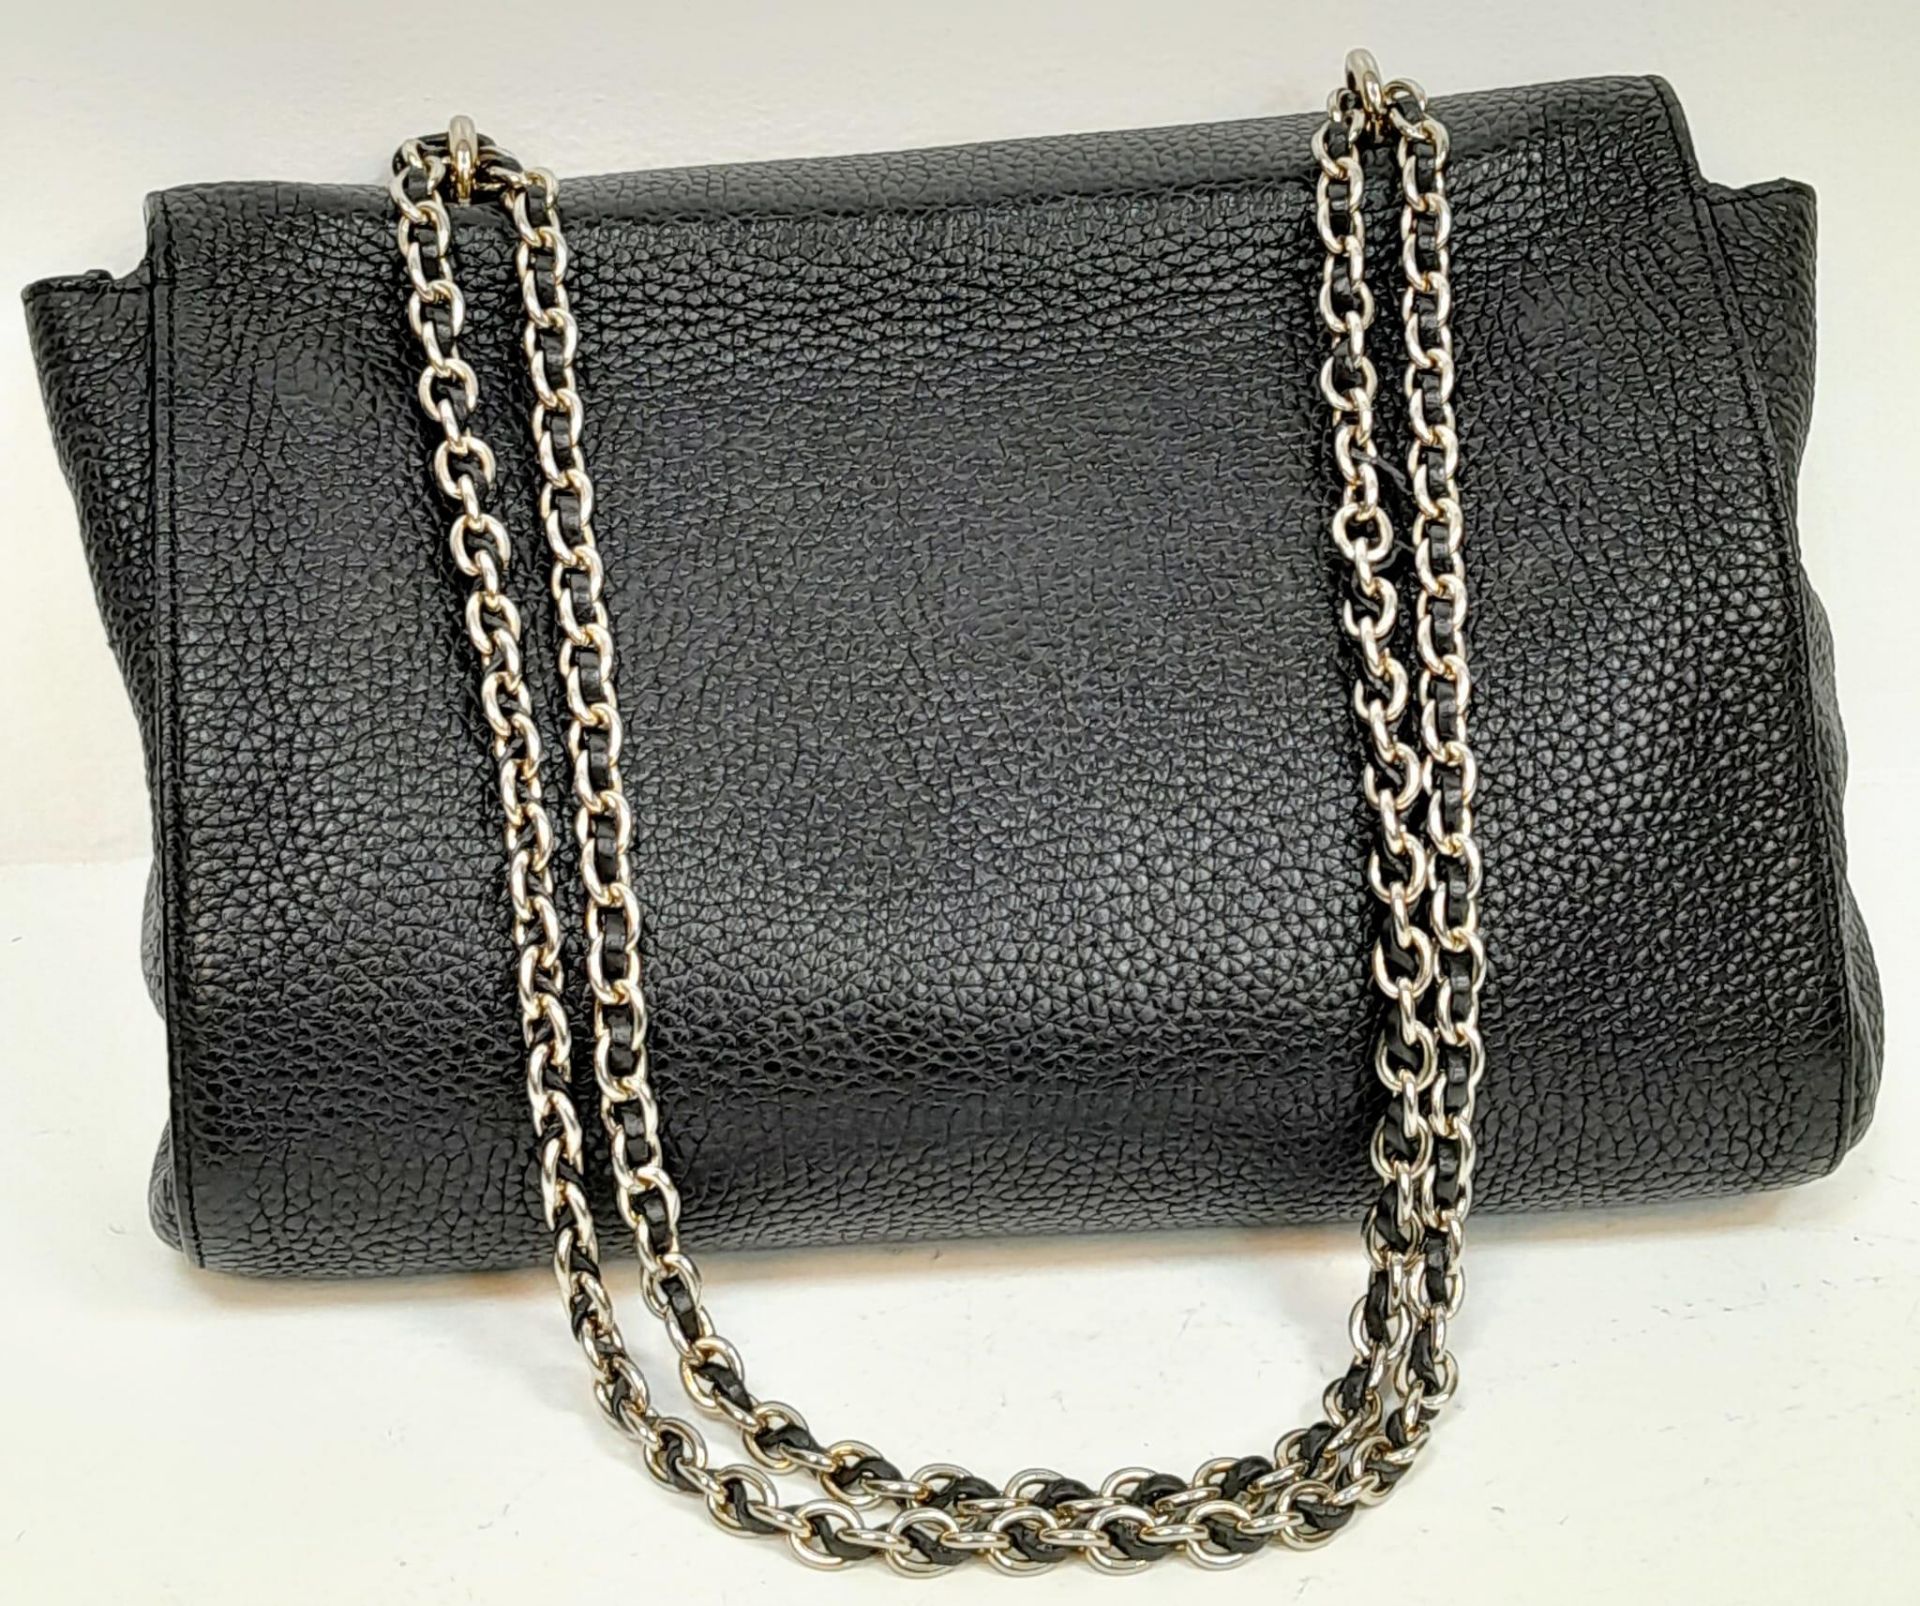 A Mulberry Black 'Lily' Bag. Leather exterior with gold-toned hardware, chain and leather strap, - Bild 3 aus 12